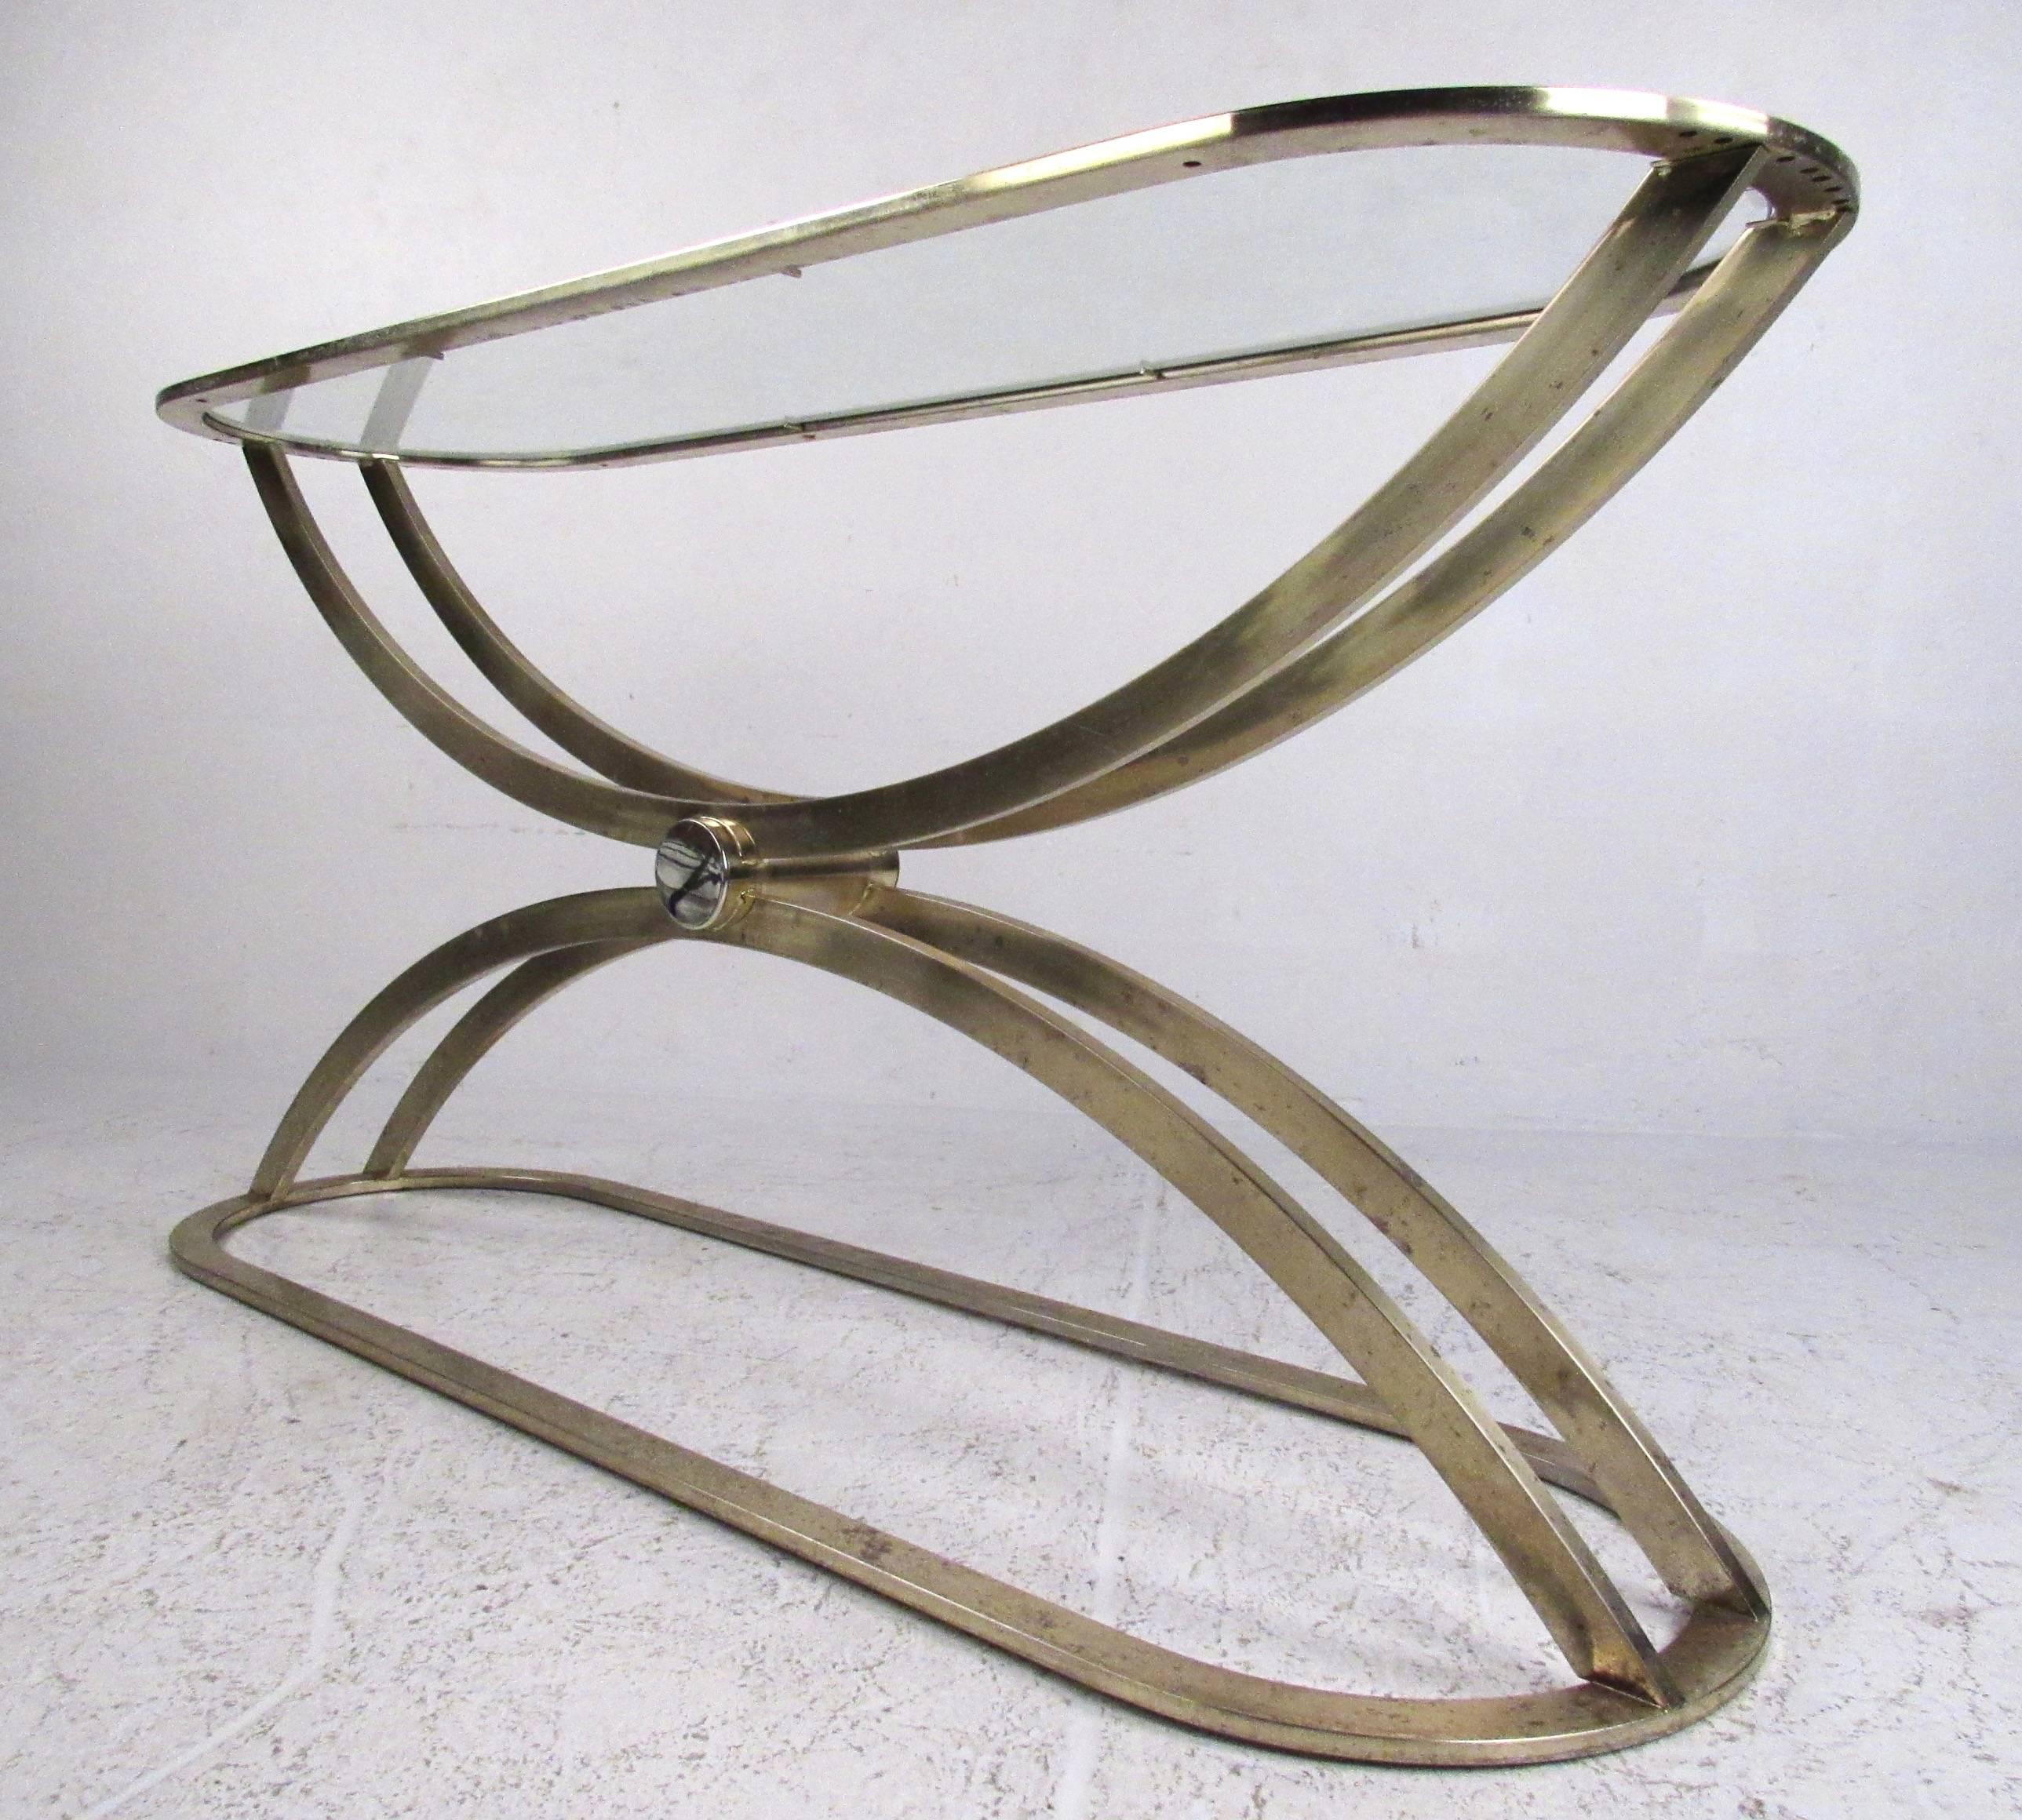 This vintage modern console table features a sculpted brass finish base with rounded edges and unique details. Wonderful Mid-Century brass finish makes this an elegant console or sofa table, perfect for use in hall, entryway, or showroom. Please